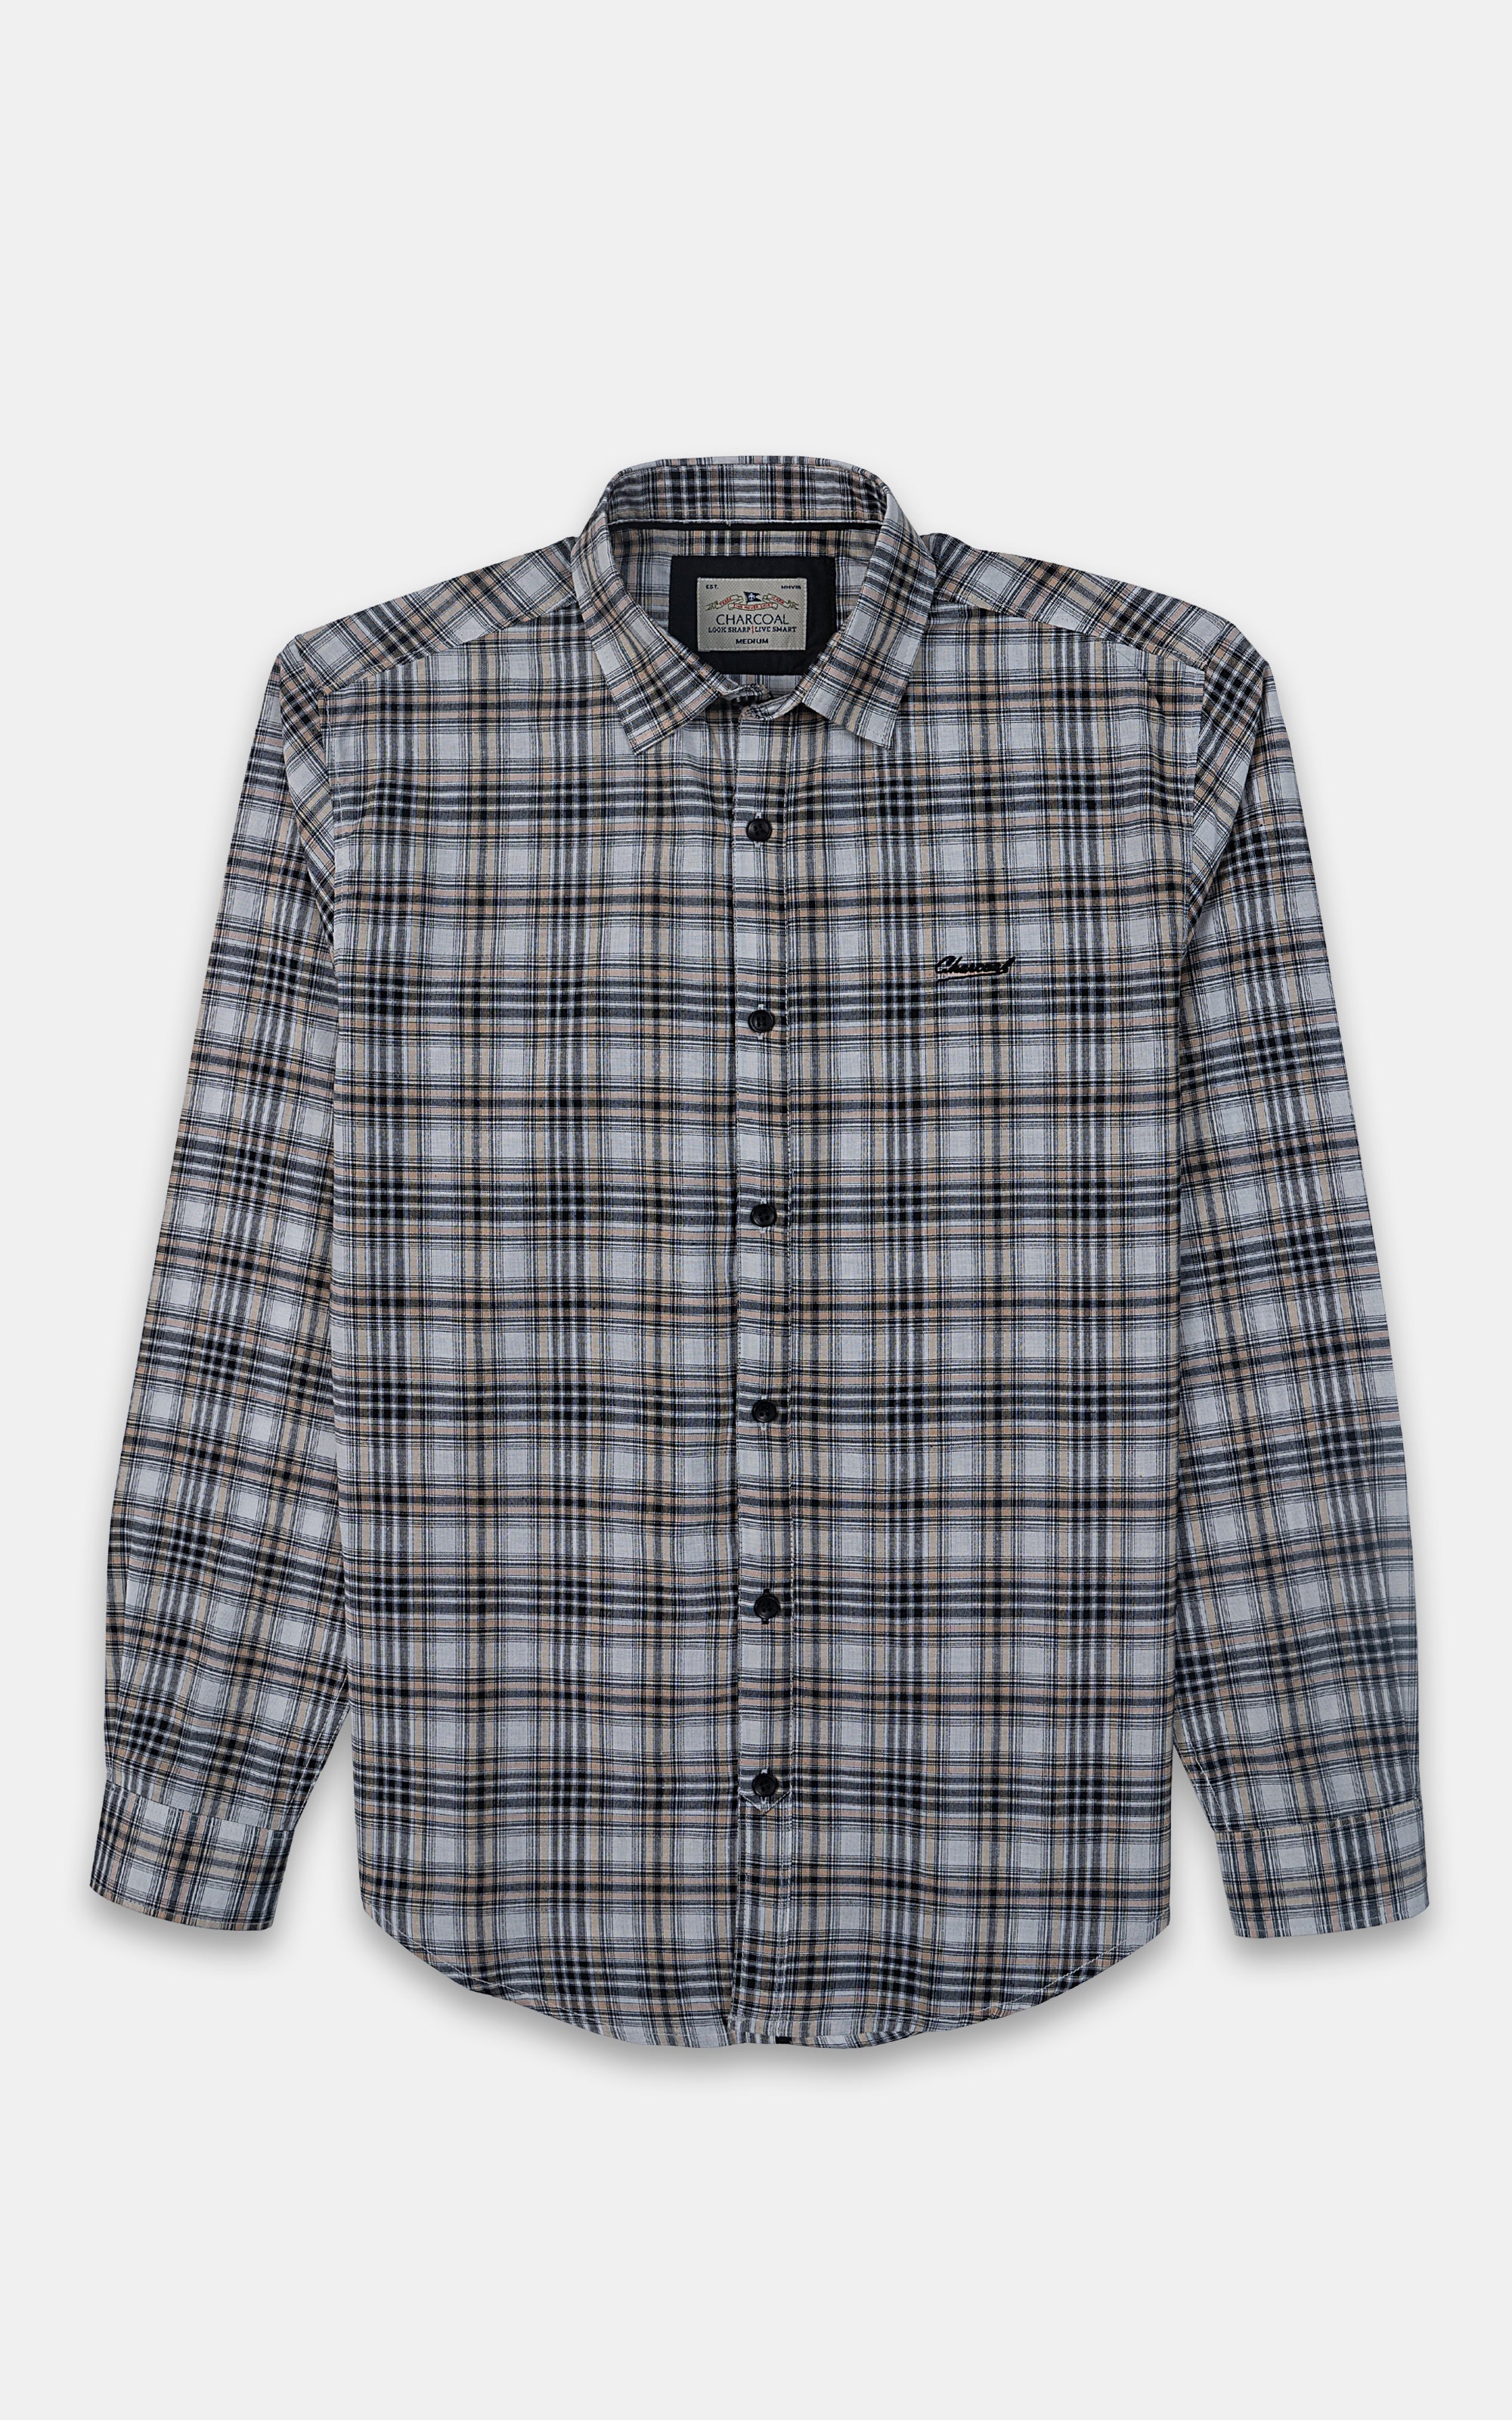 CASUAL SHIRT BEIGE CHECK